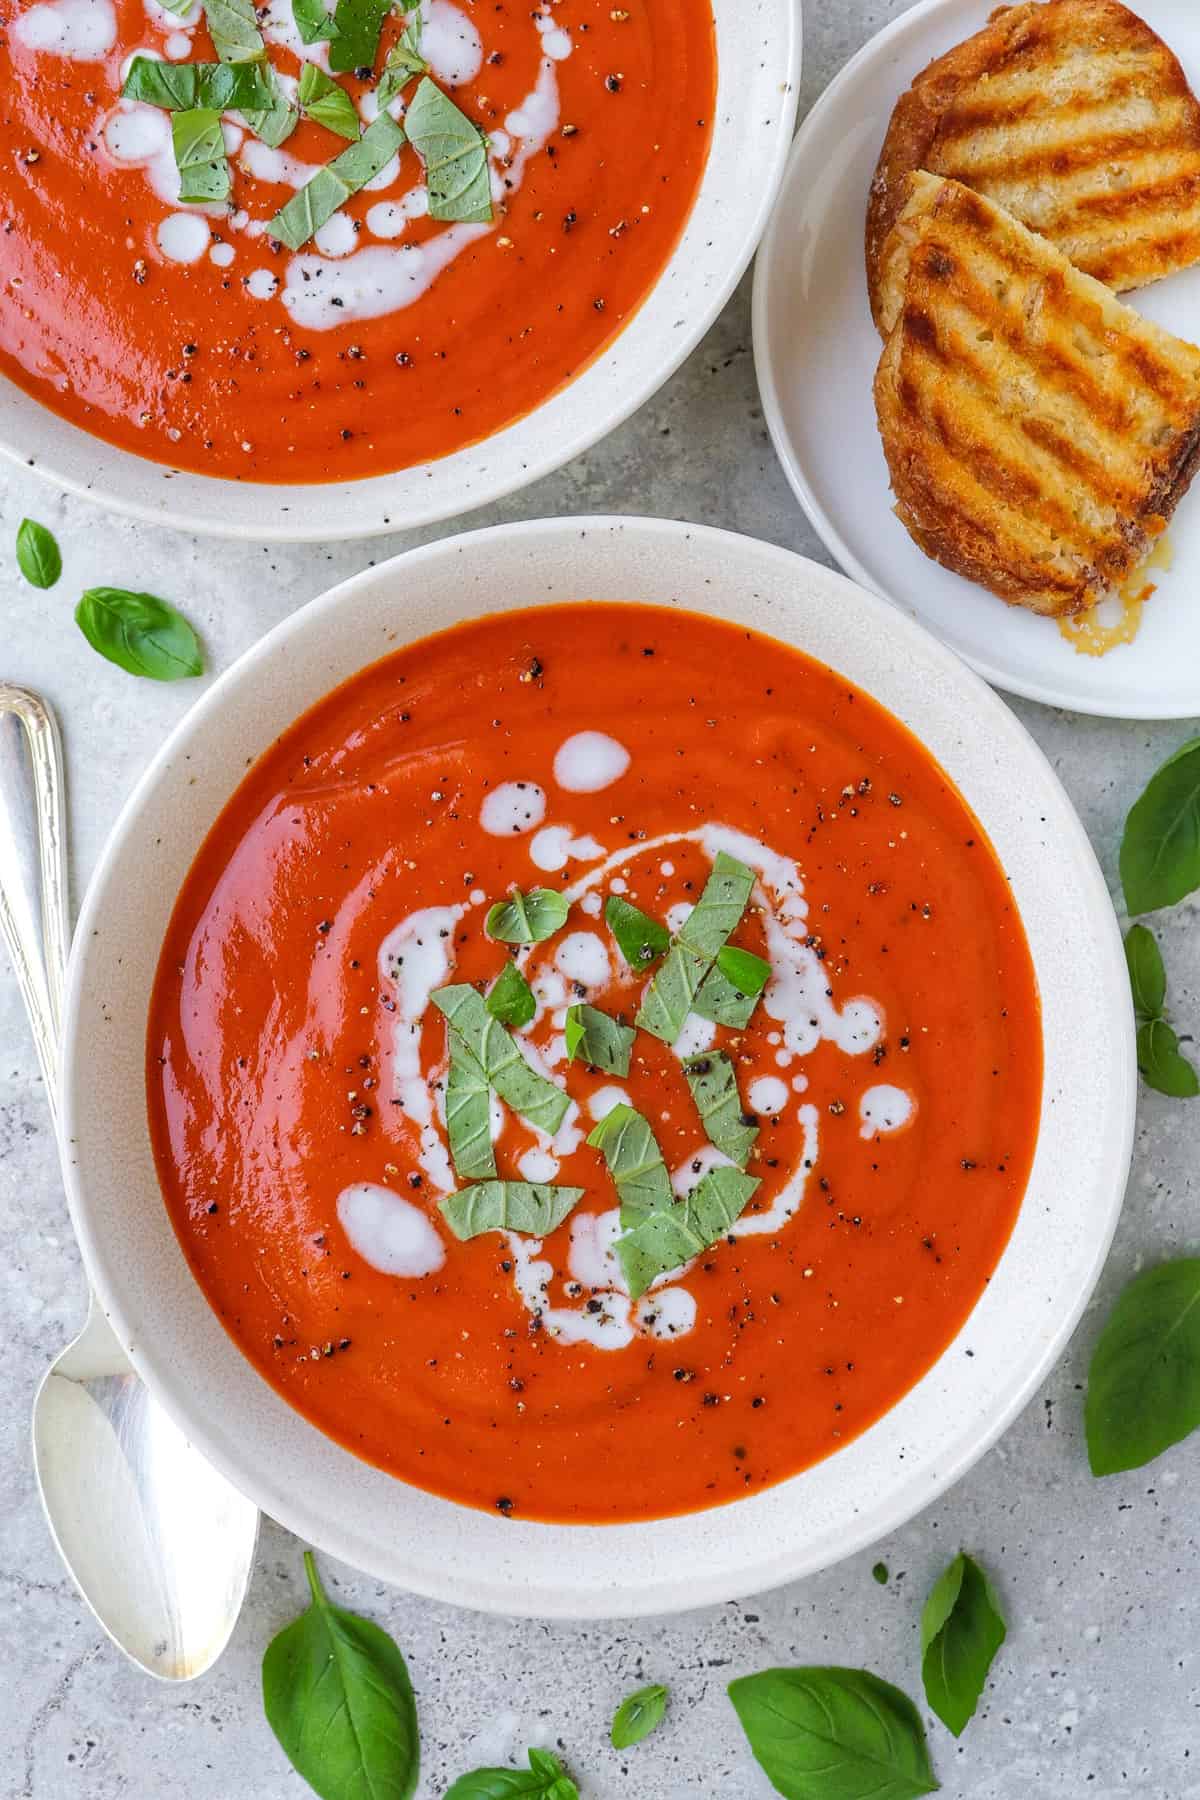 Two bowls of tomato soup with shredded basil leaves and coconut cream drizzled on top.